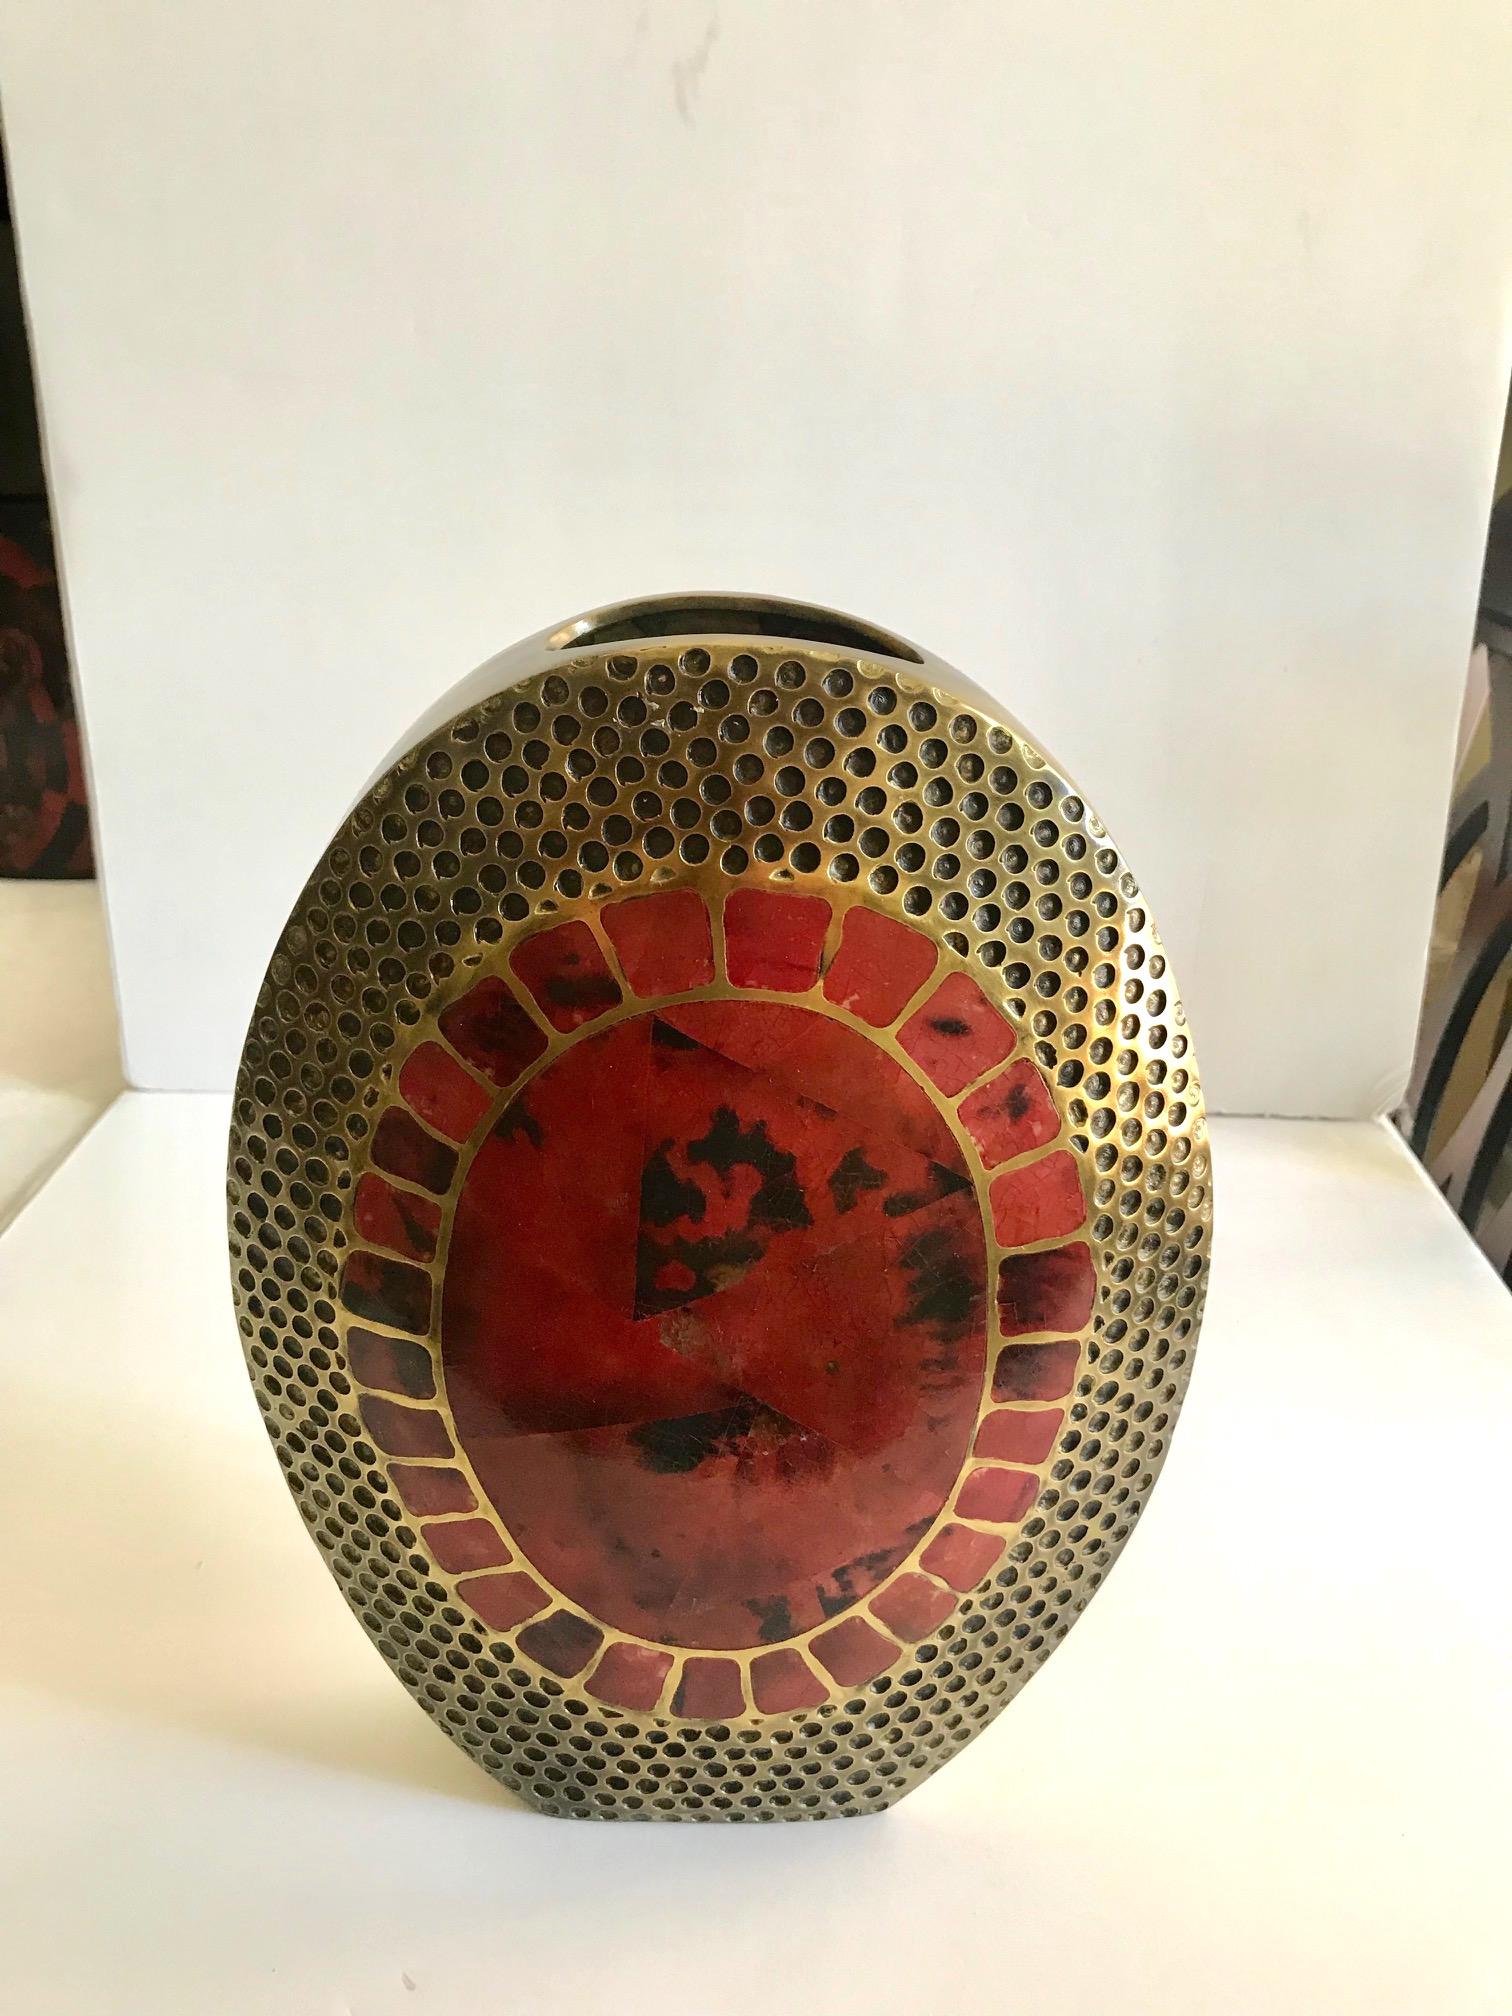 Exquisite organic modern large vase with ovoid form. Vase is comprised of hand forged bronze metal with mosaic inlays of lacquered pen-shell in red and black. The geometric designs are featured on the centre of vase on either side. Bronze has